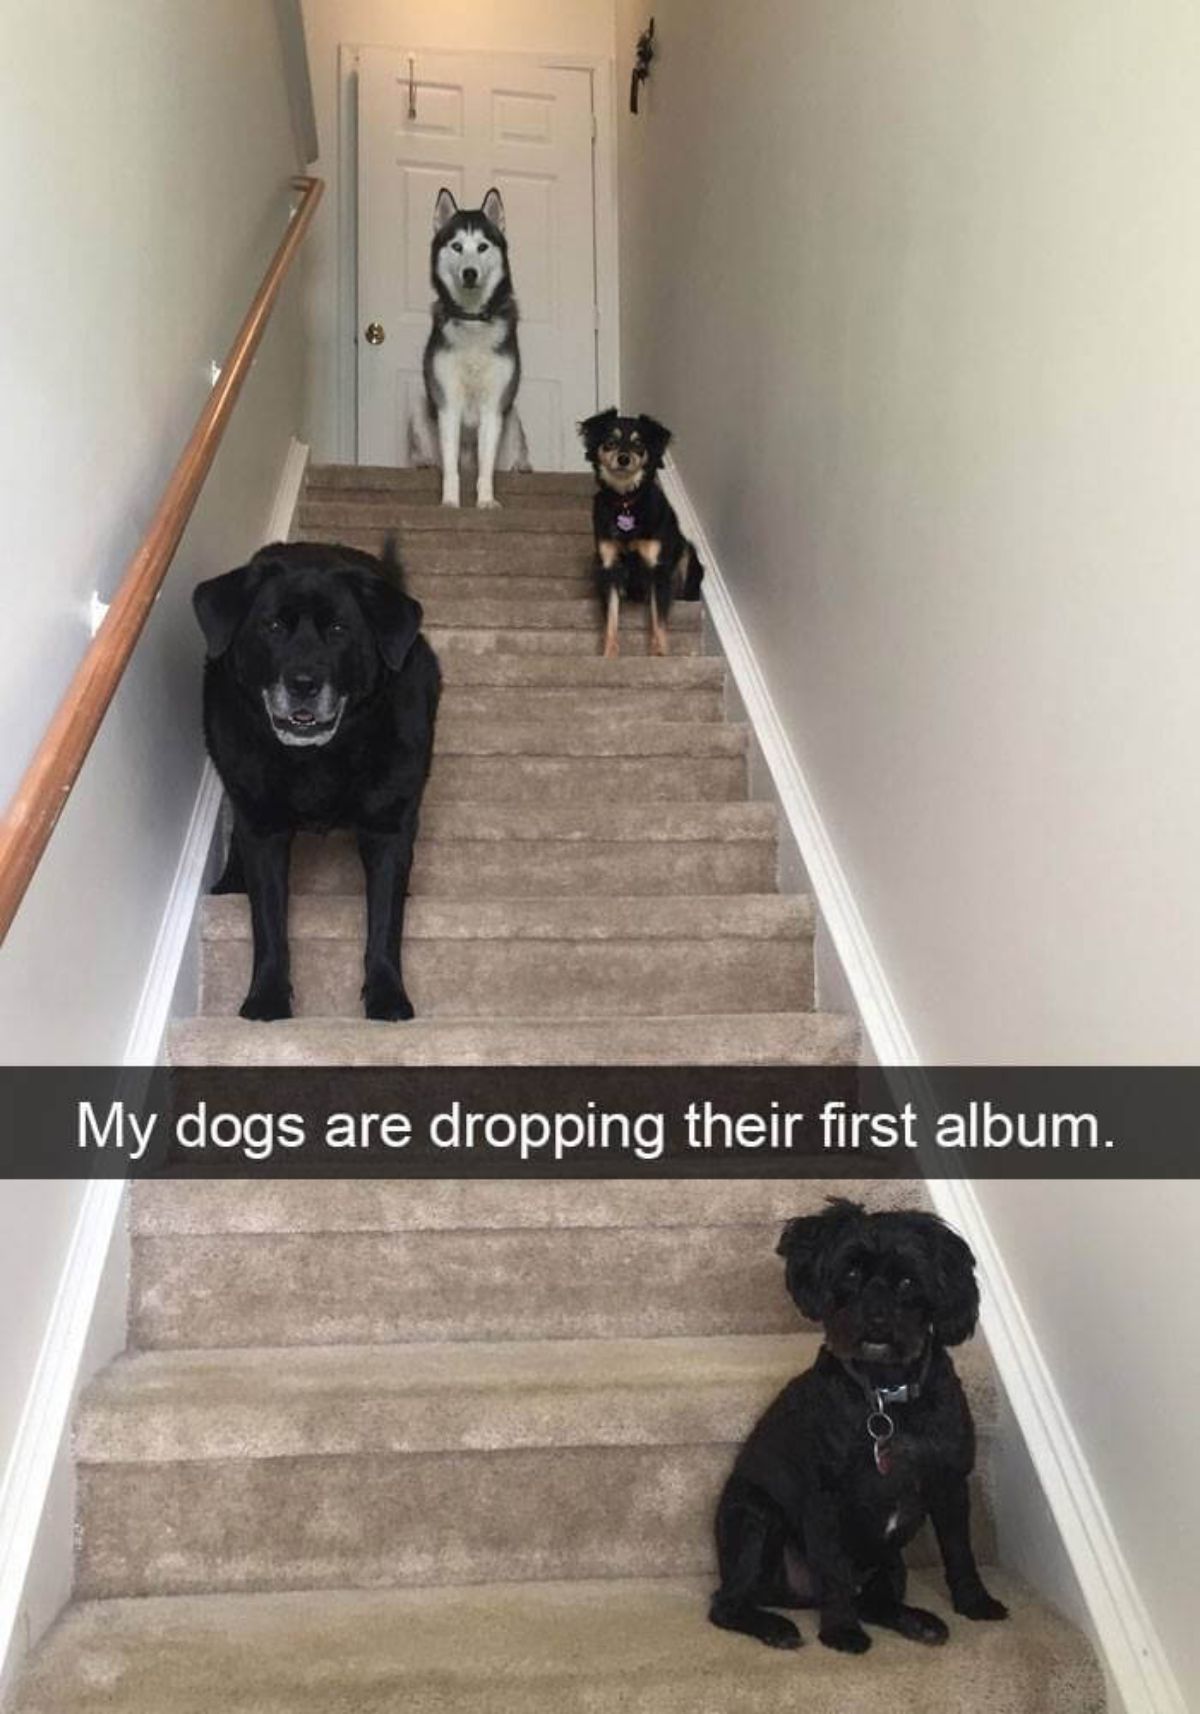 small black dog, large black dog, brown and black dog and black and white husky dogs sitting on brown stairs with a caption saying my dogs are dropping their first album